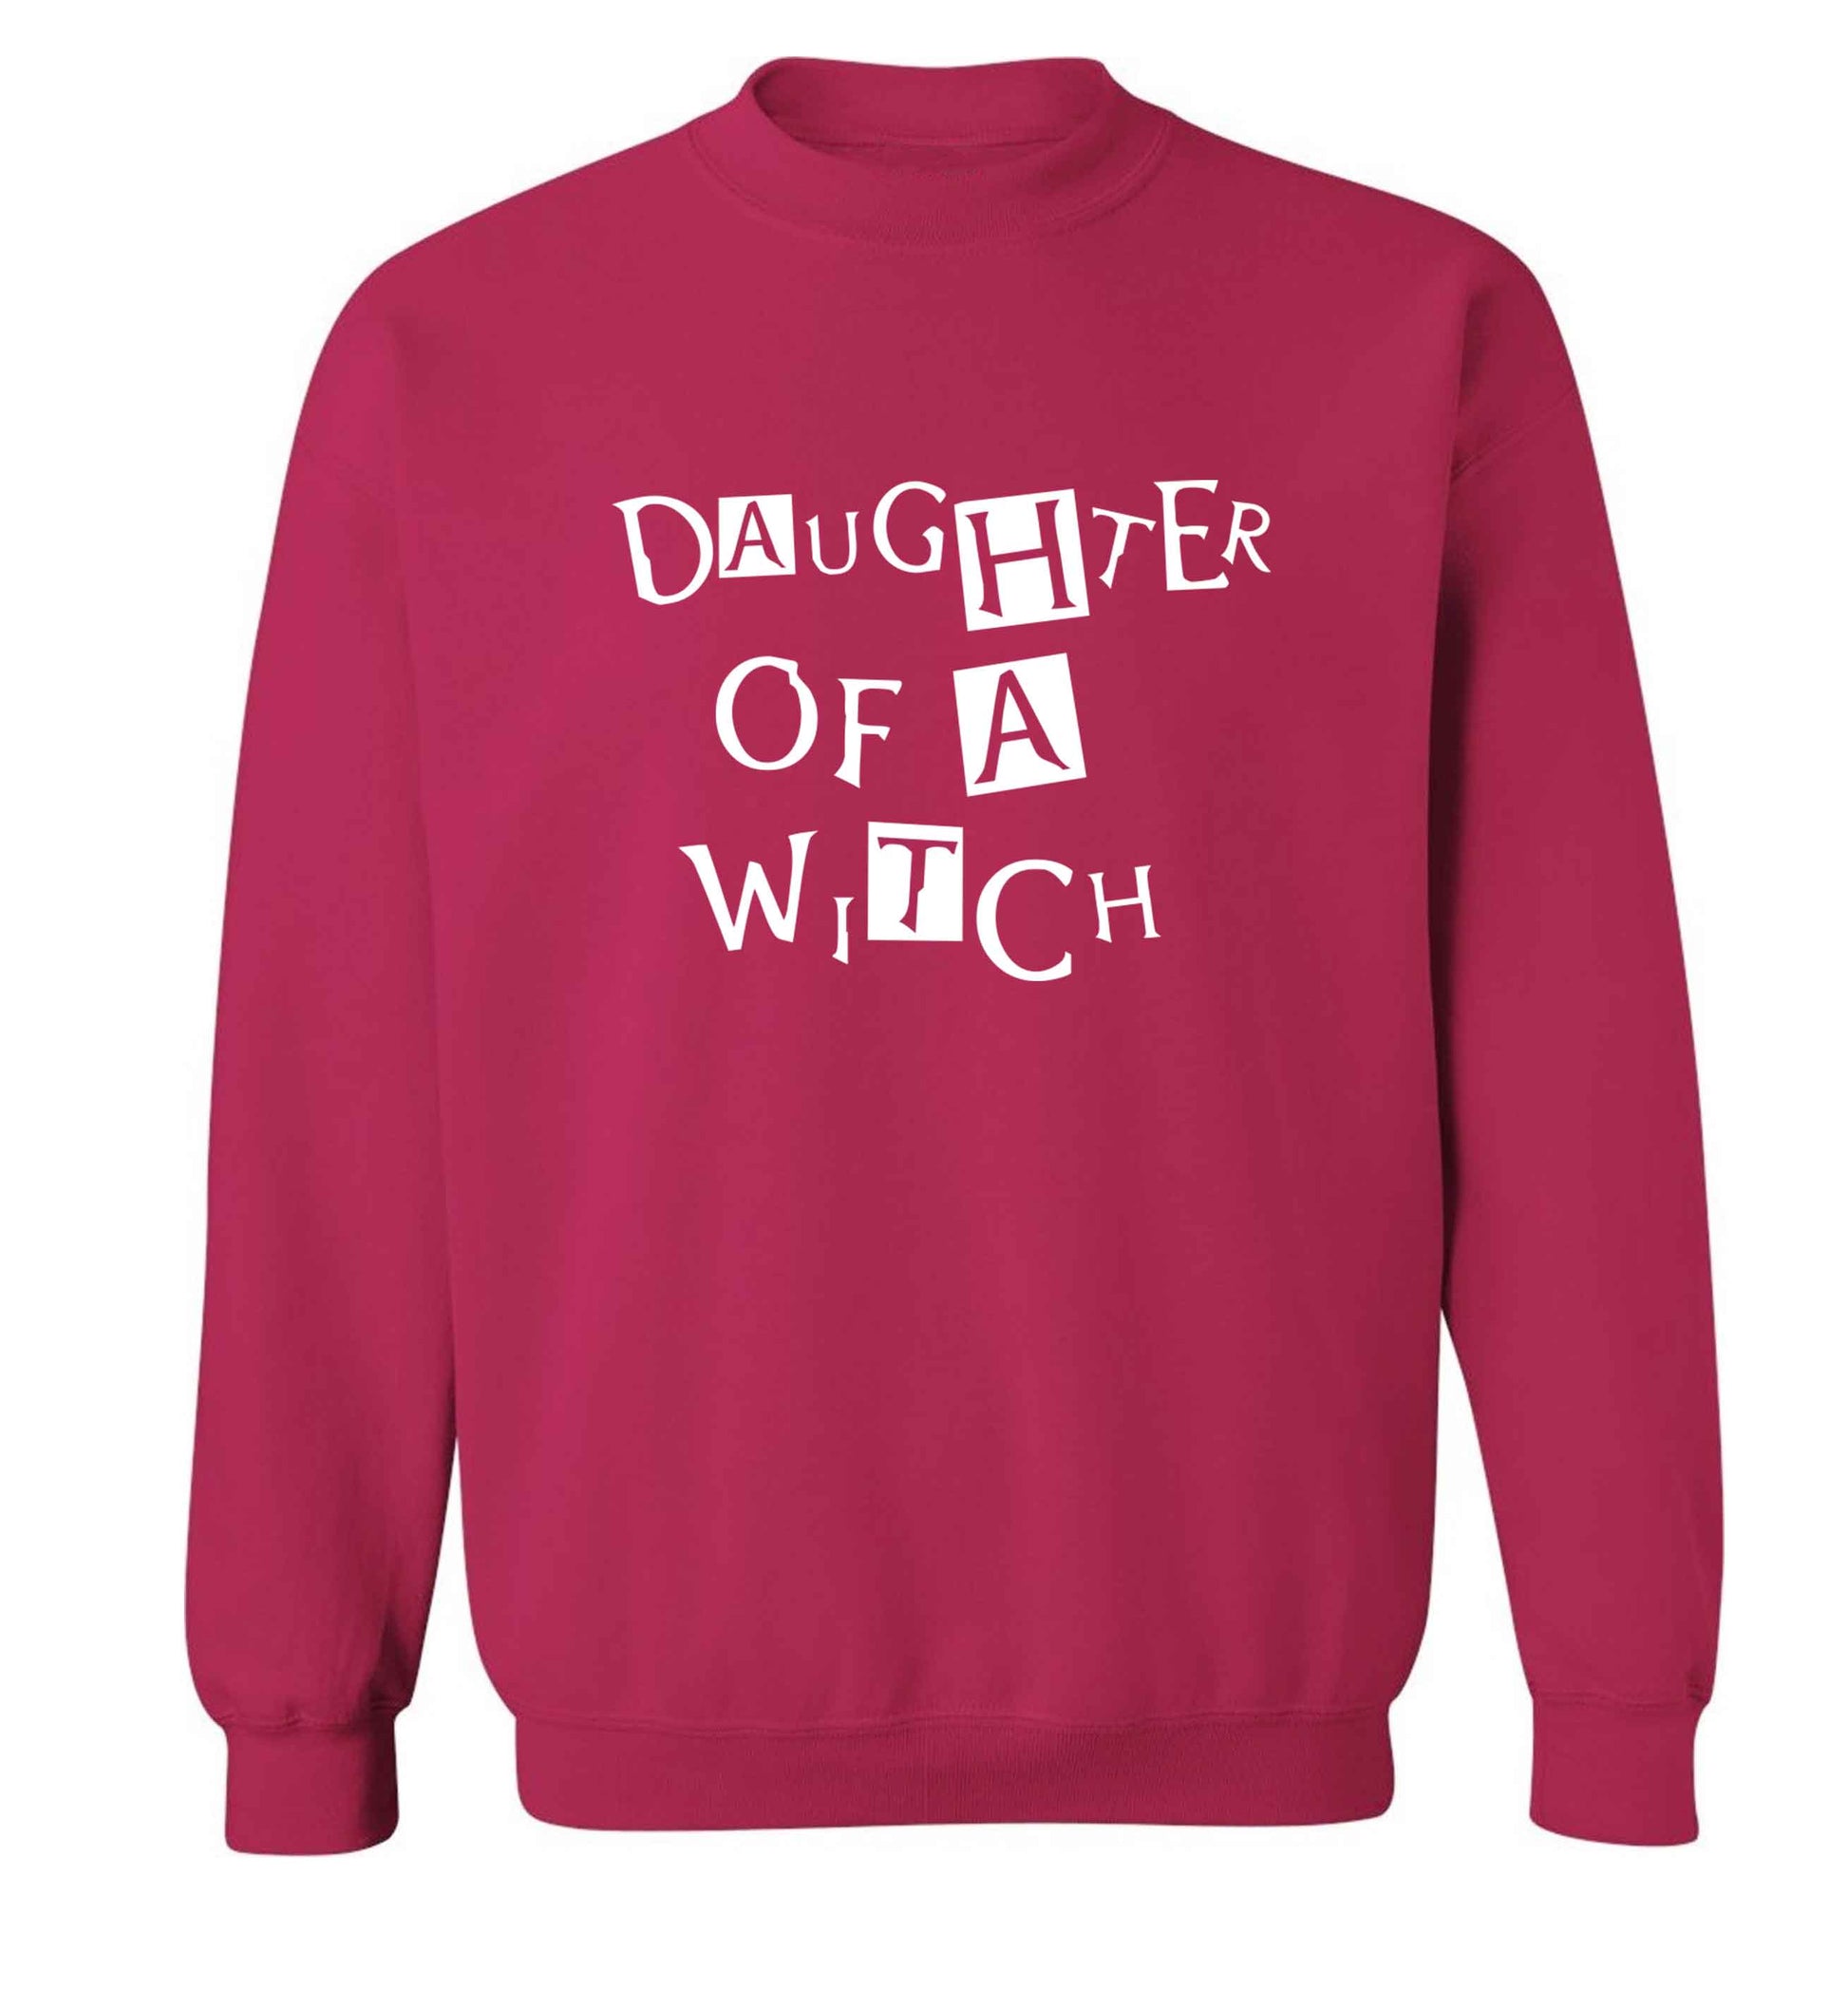 Daughter of a witch adult's unisex pink sweater 2XL